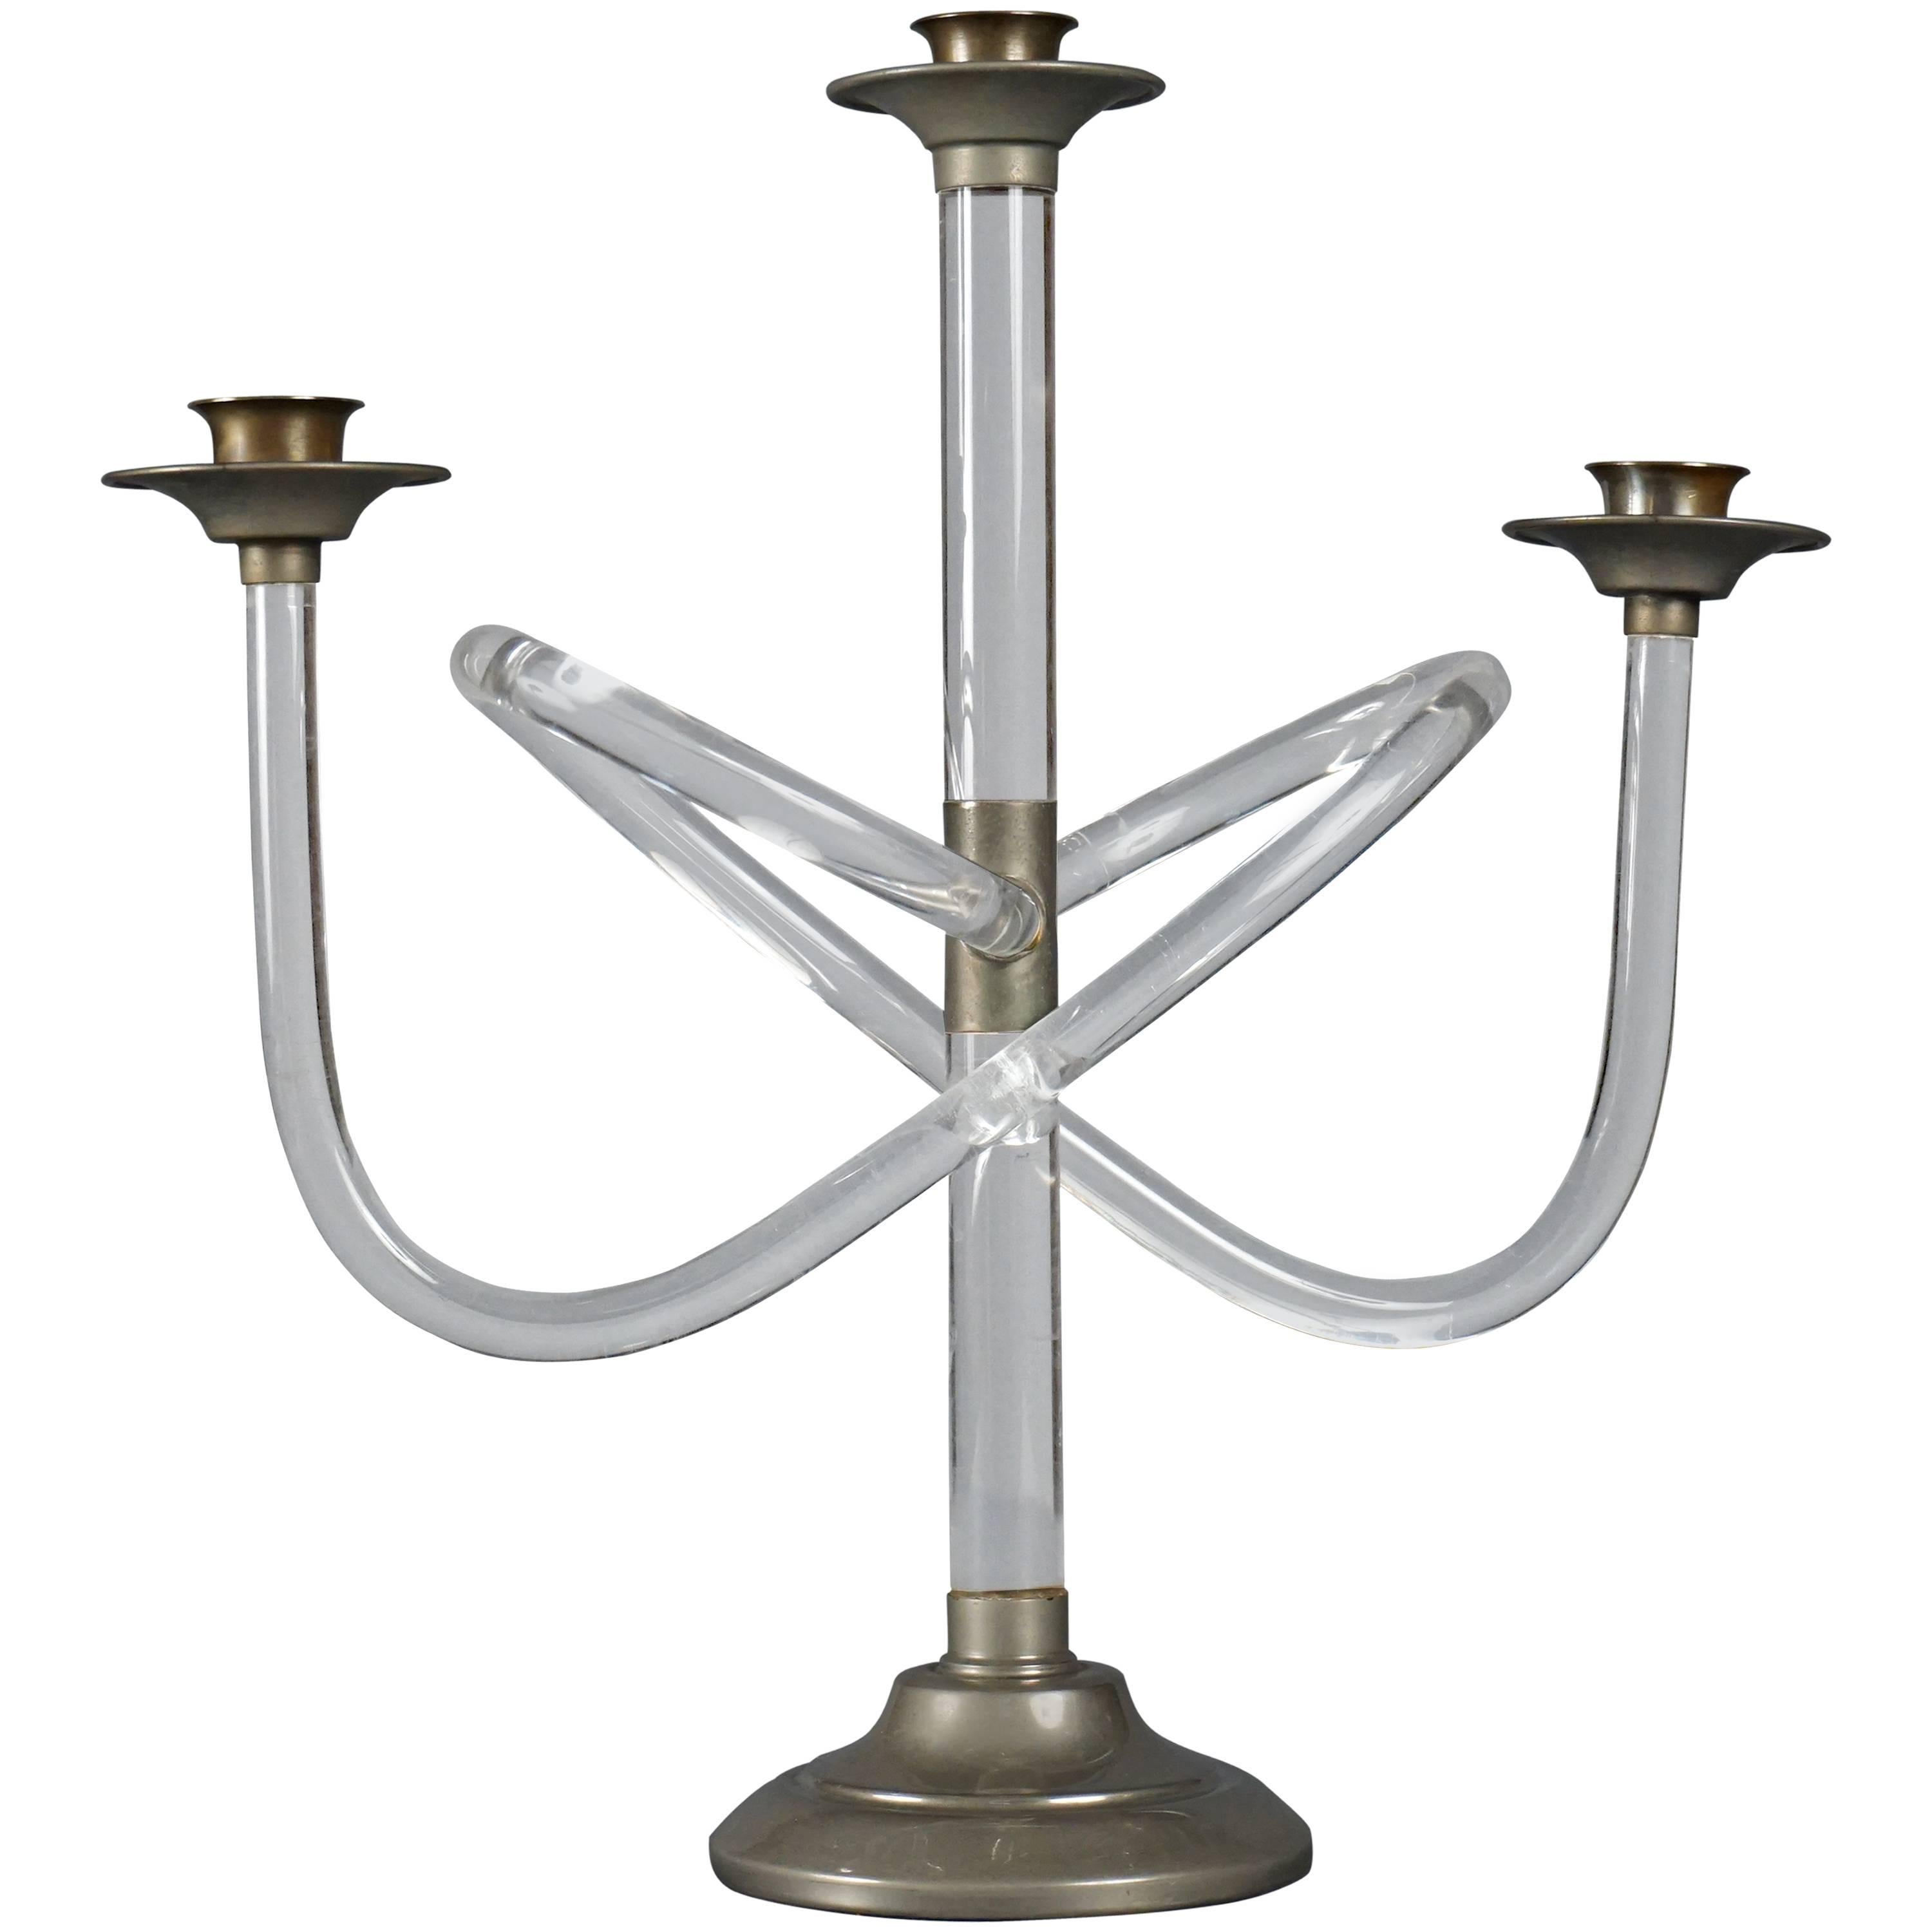 Italian Mid-Century Lucite and Brass Candelabra For Sale